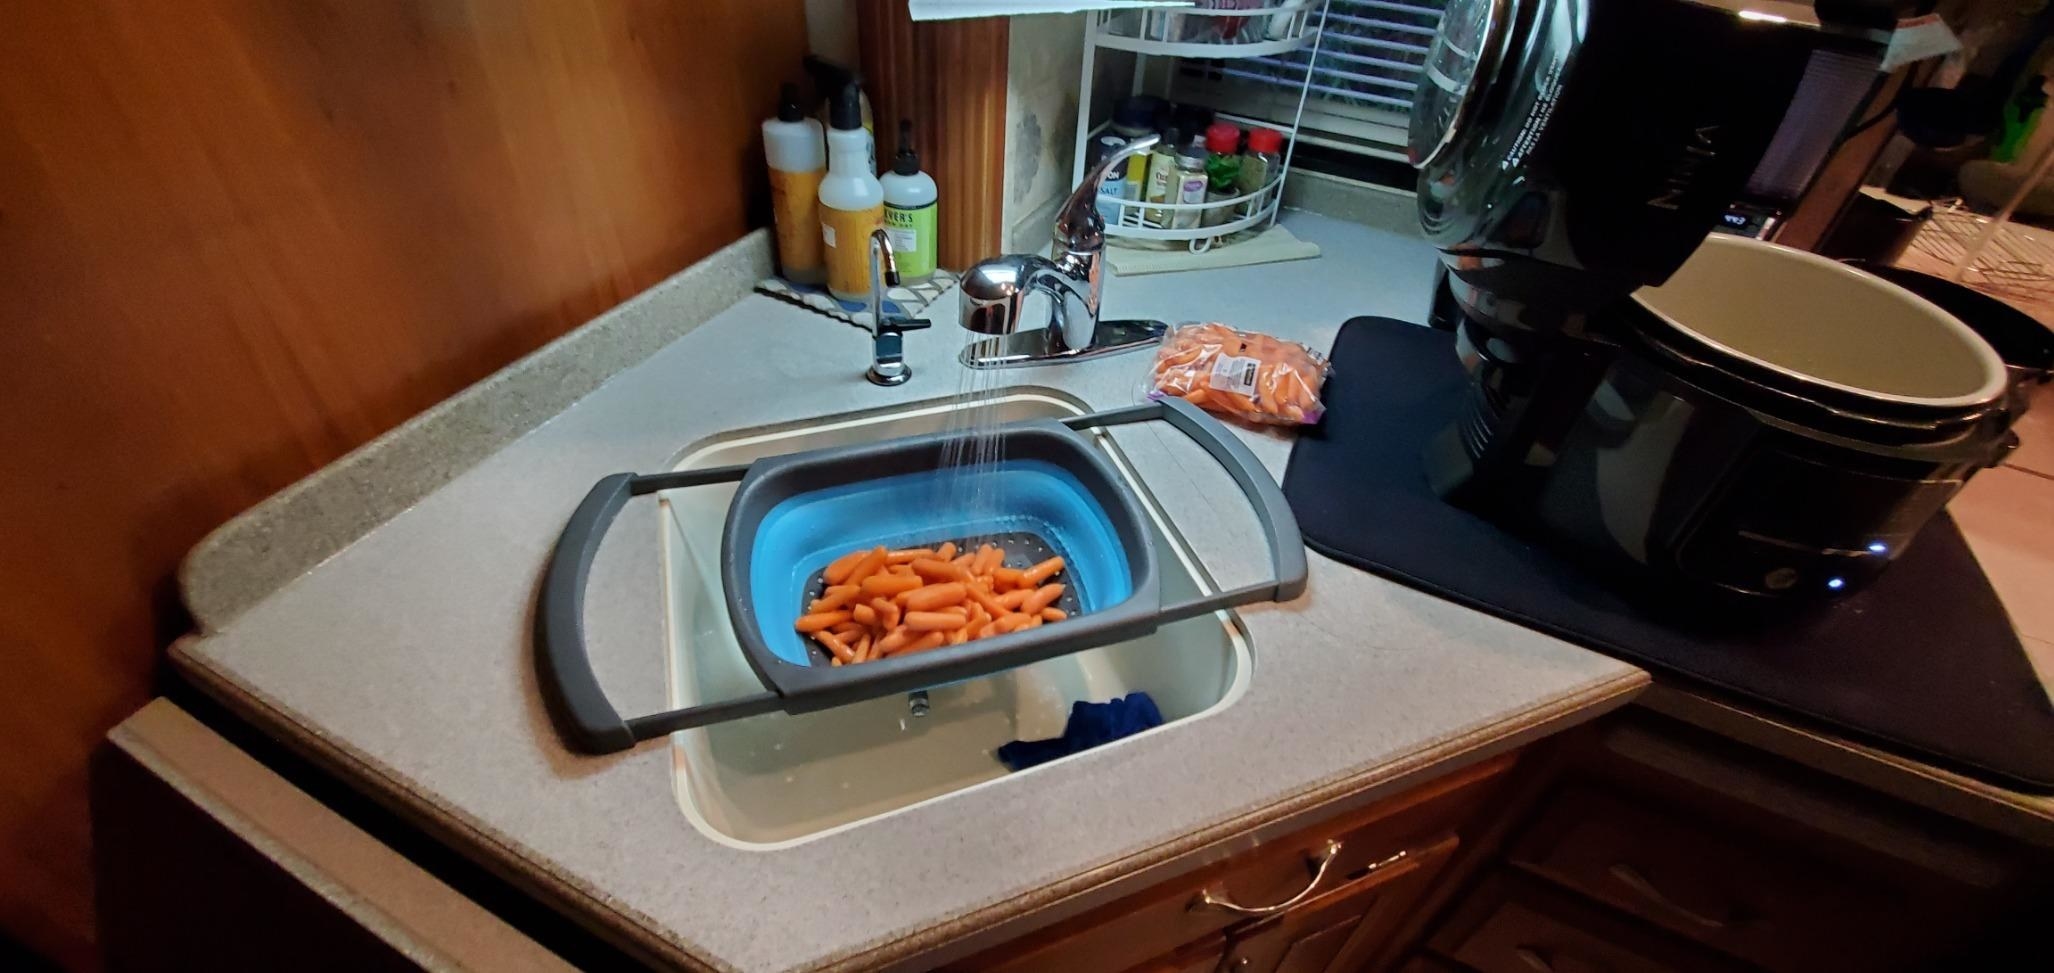 the collapsible colander containing carrot sticks